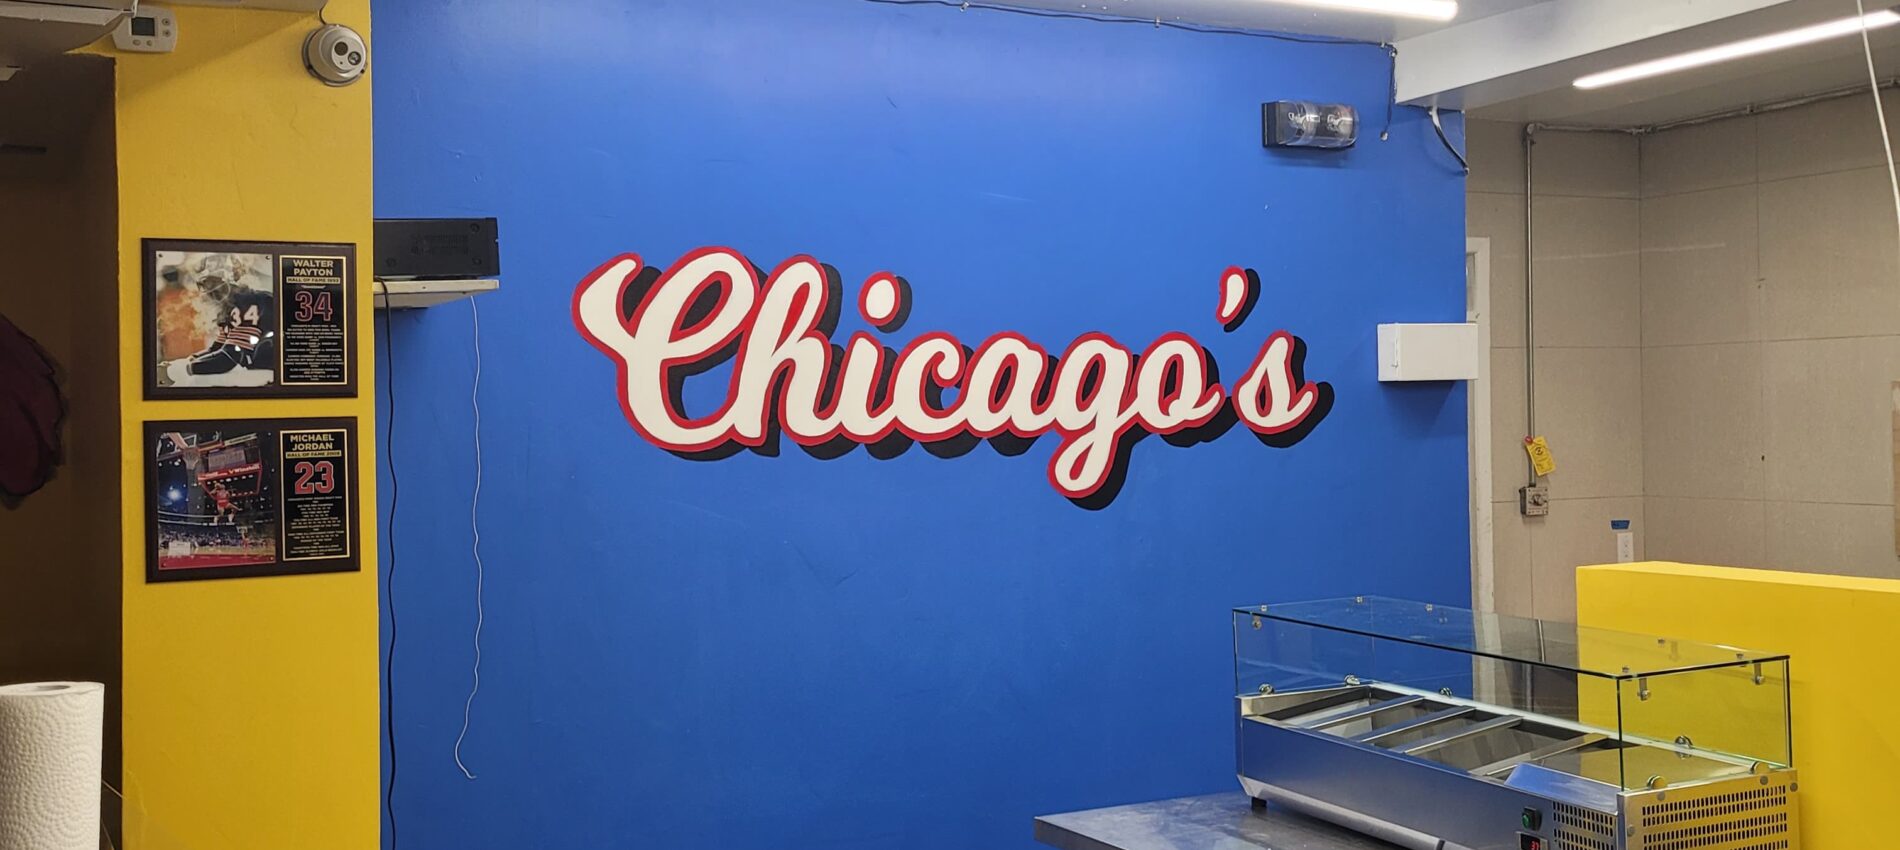 Chicago’s Restaurant Sign Painting